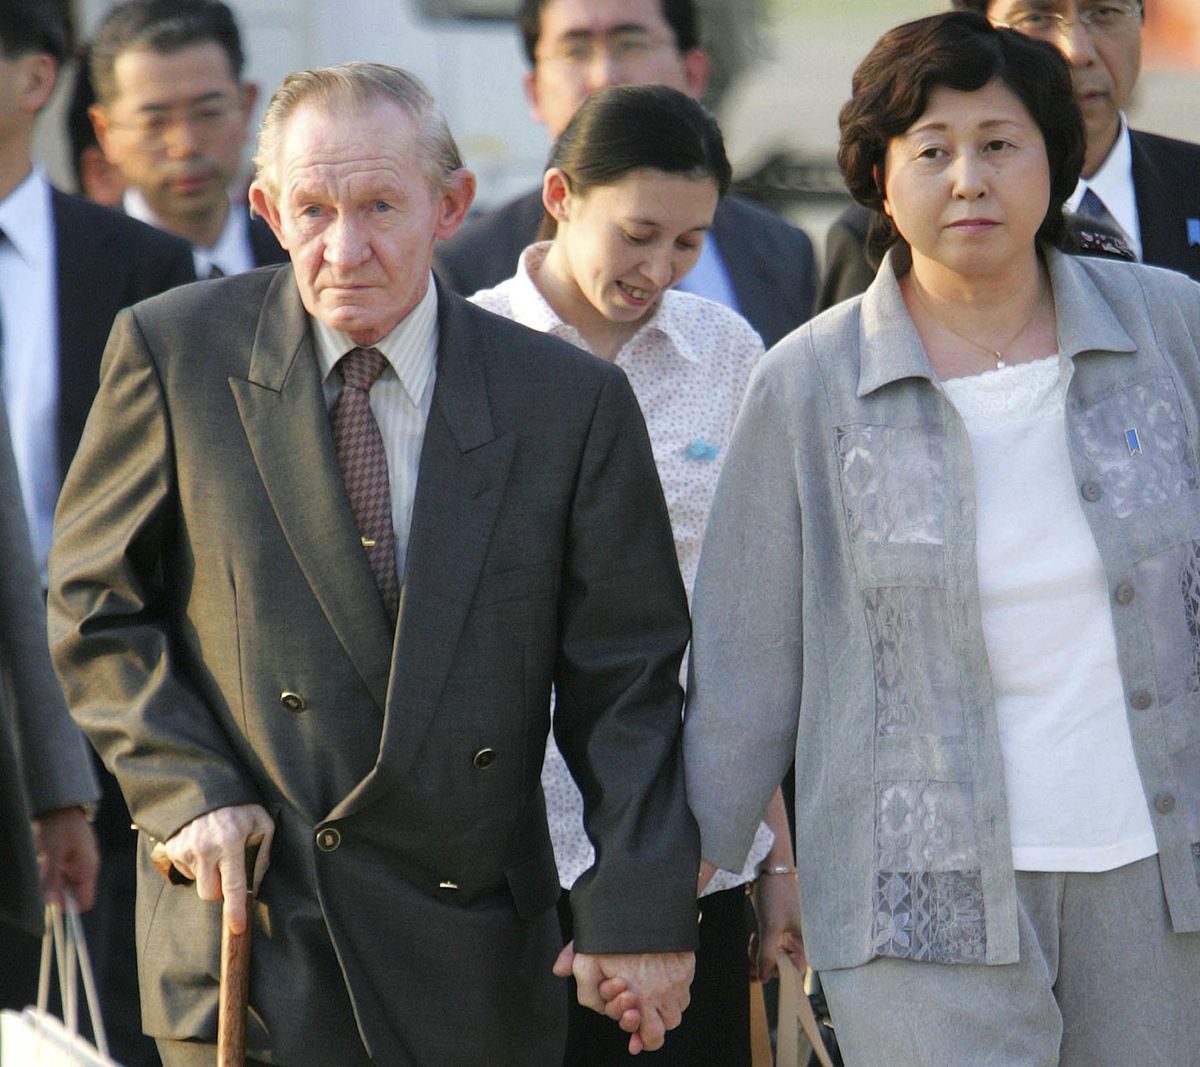 In this July 18, 2004  photo, former U.S. Army deserter to North Korea, Charles Jenkins, left, escorted by his wife, Hitomi Soga, right, and their daughter Mika, center, arrives at Tokyo’s Haneda International Airport. Jenkins, who married Soga, a Japanese abductee, and lived in Japan after their release in the 2000s, has died. He was 77. (Itsuo Inouye / AP)